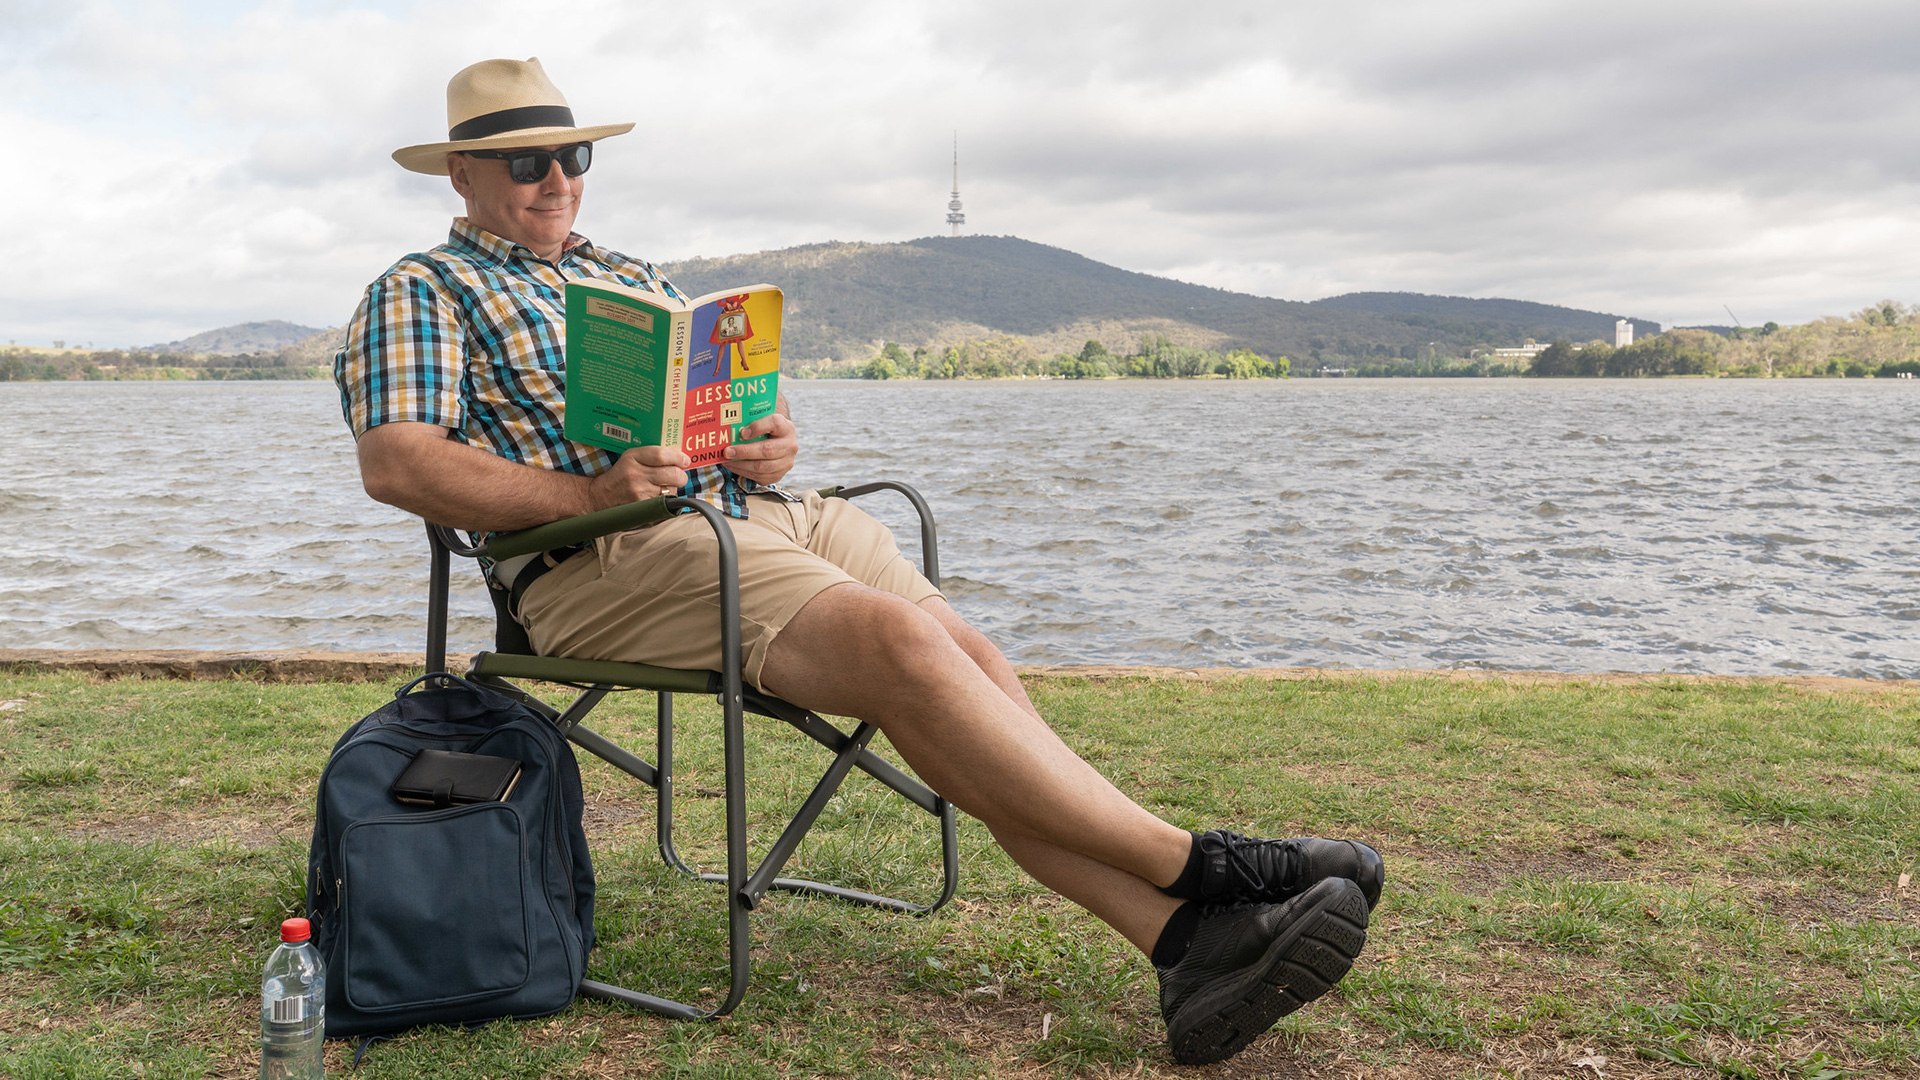 A man sits in a chair by the water, reading a book.